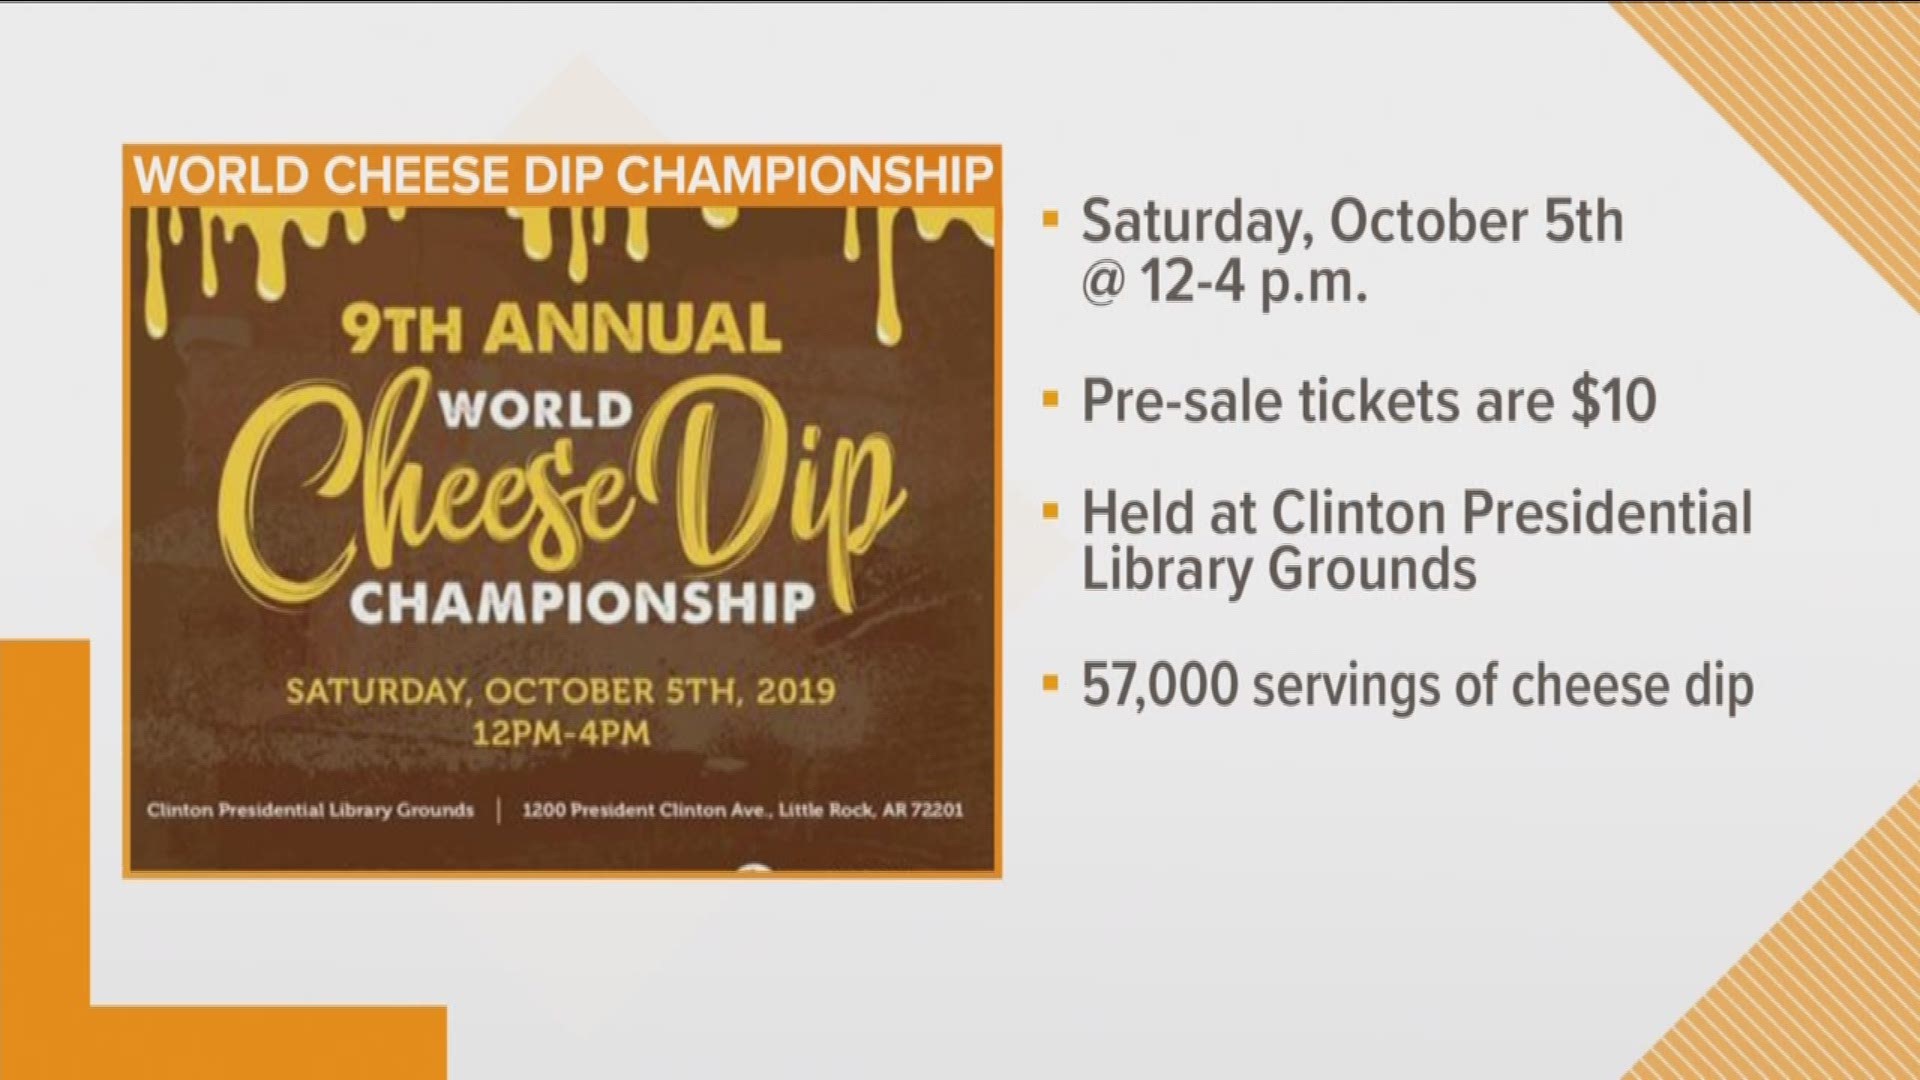 This Saturday is the World Cheese Dip Championship benefiting the Harmony Health Clinic.